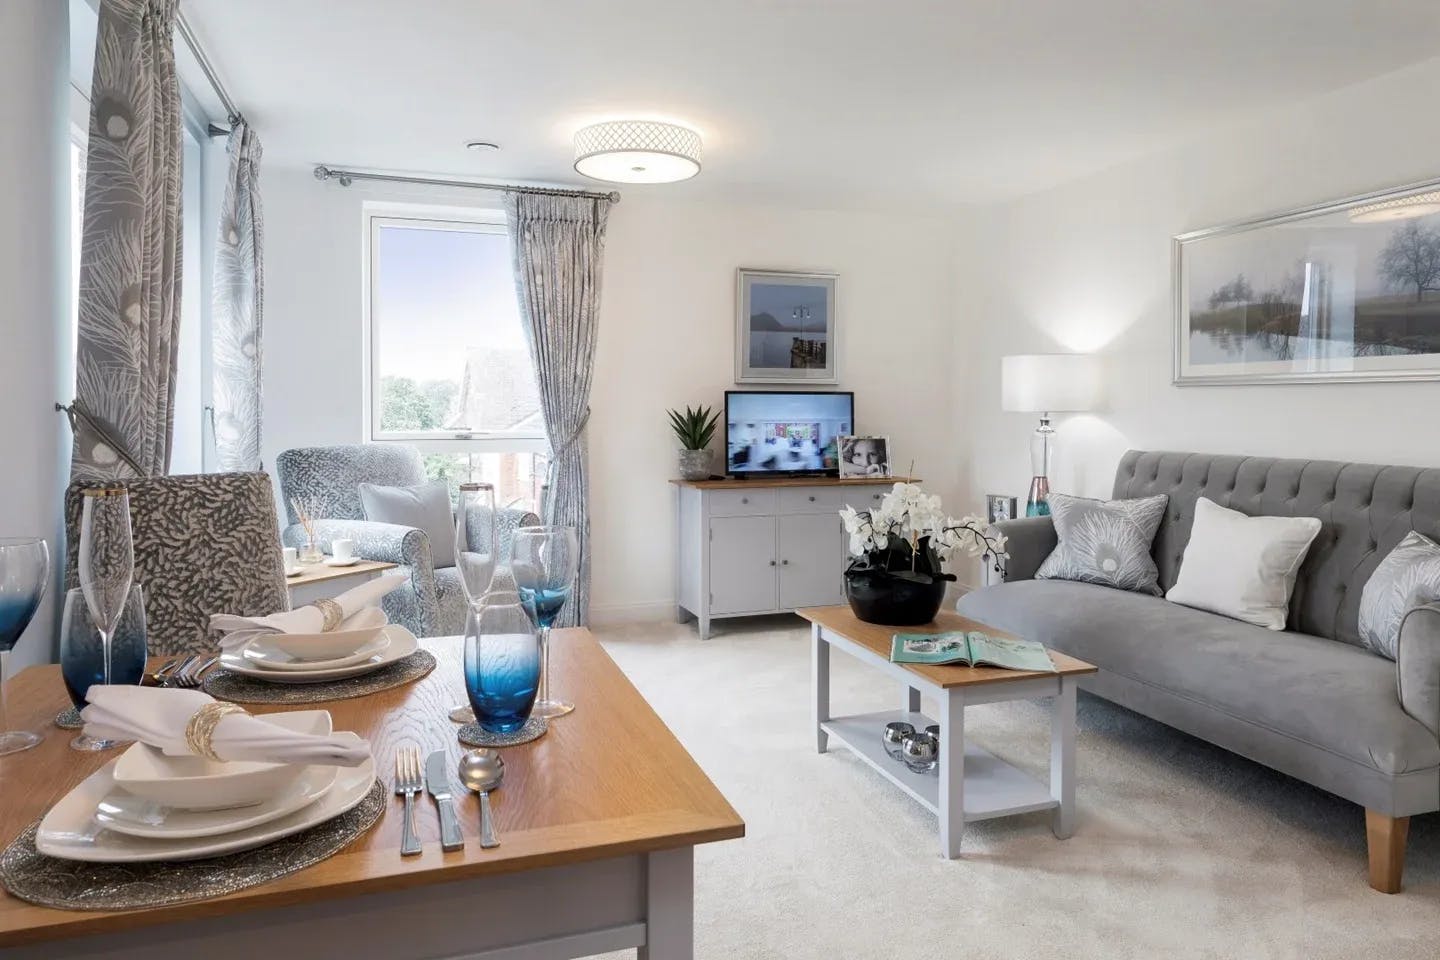 Living Room at Holly Place Retirement Development in Surrey, South East England